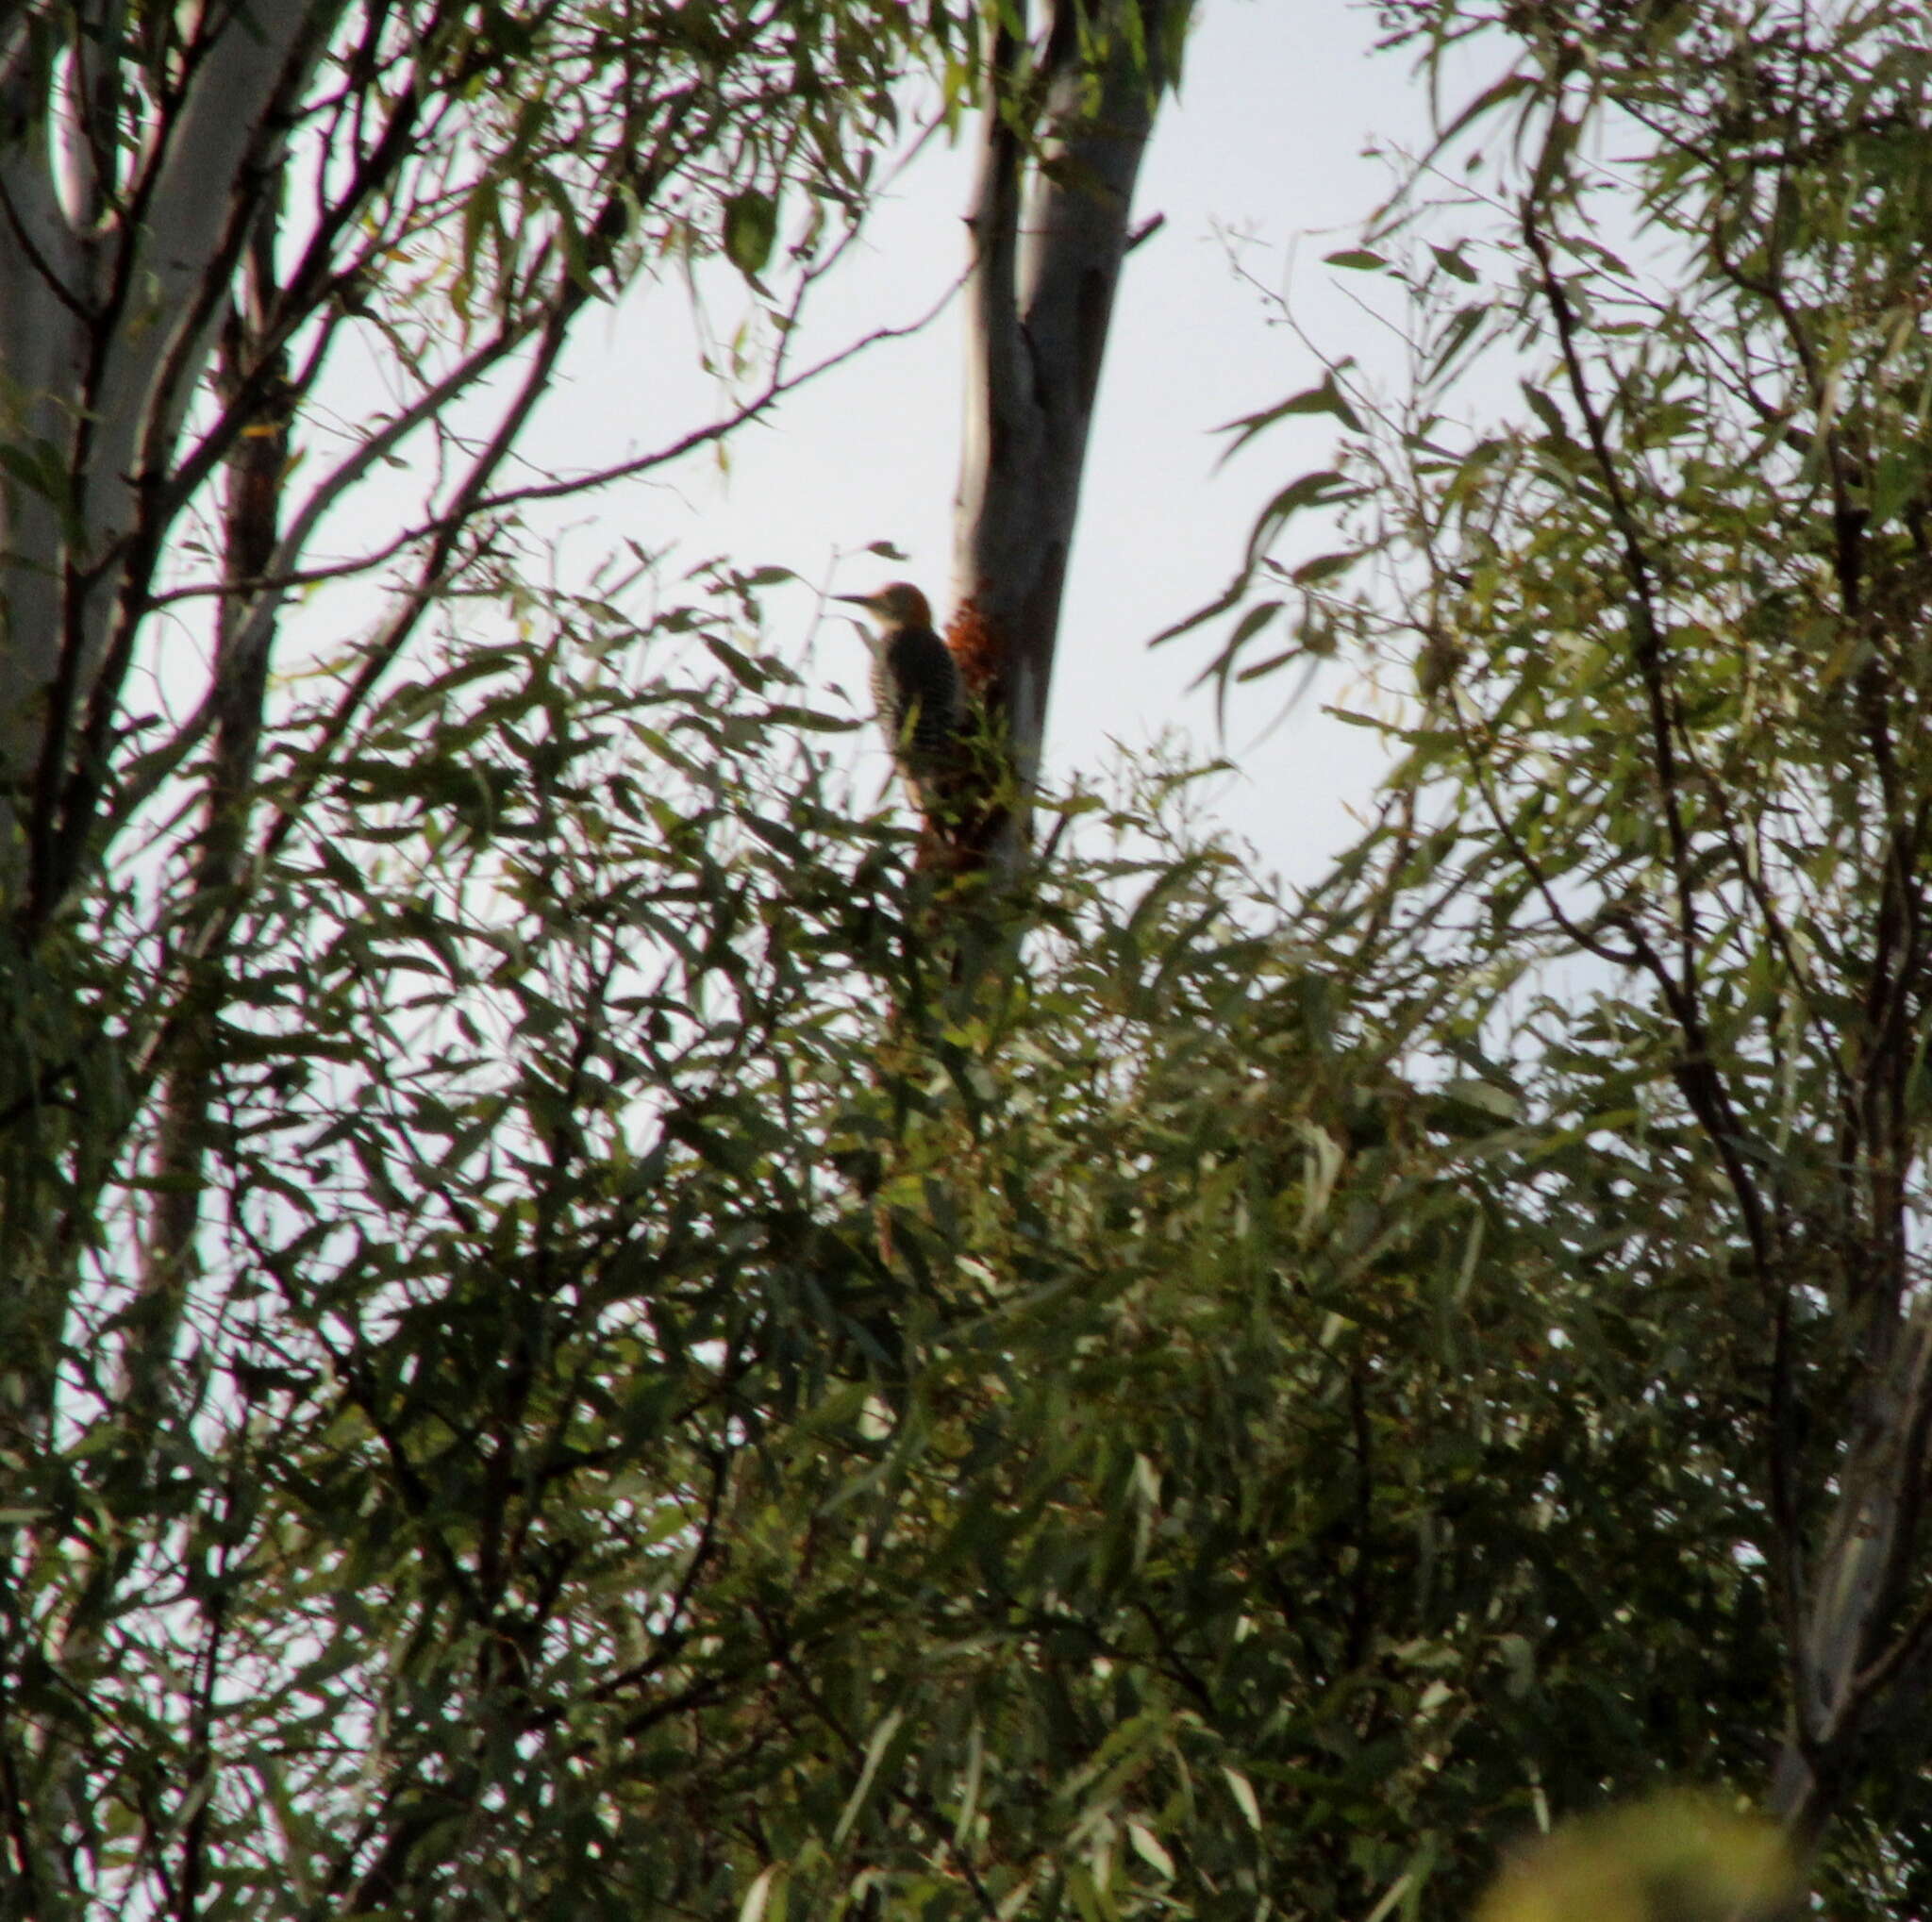 Image of Golden-fronted Woodpecker